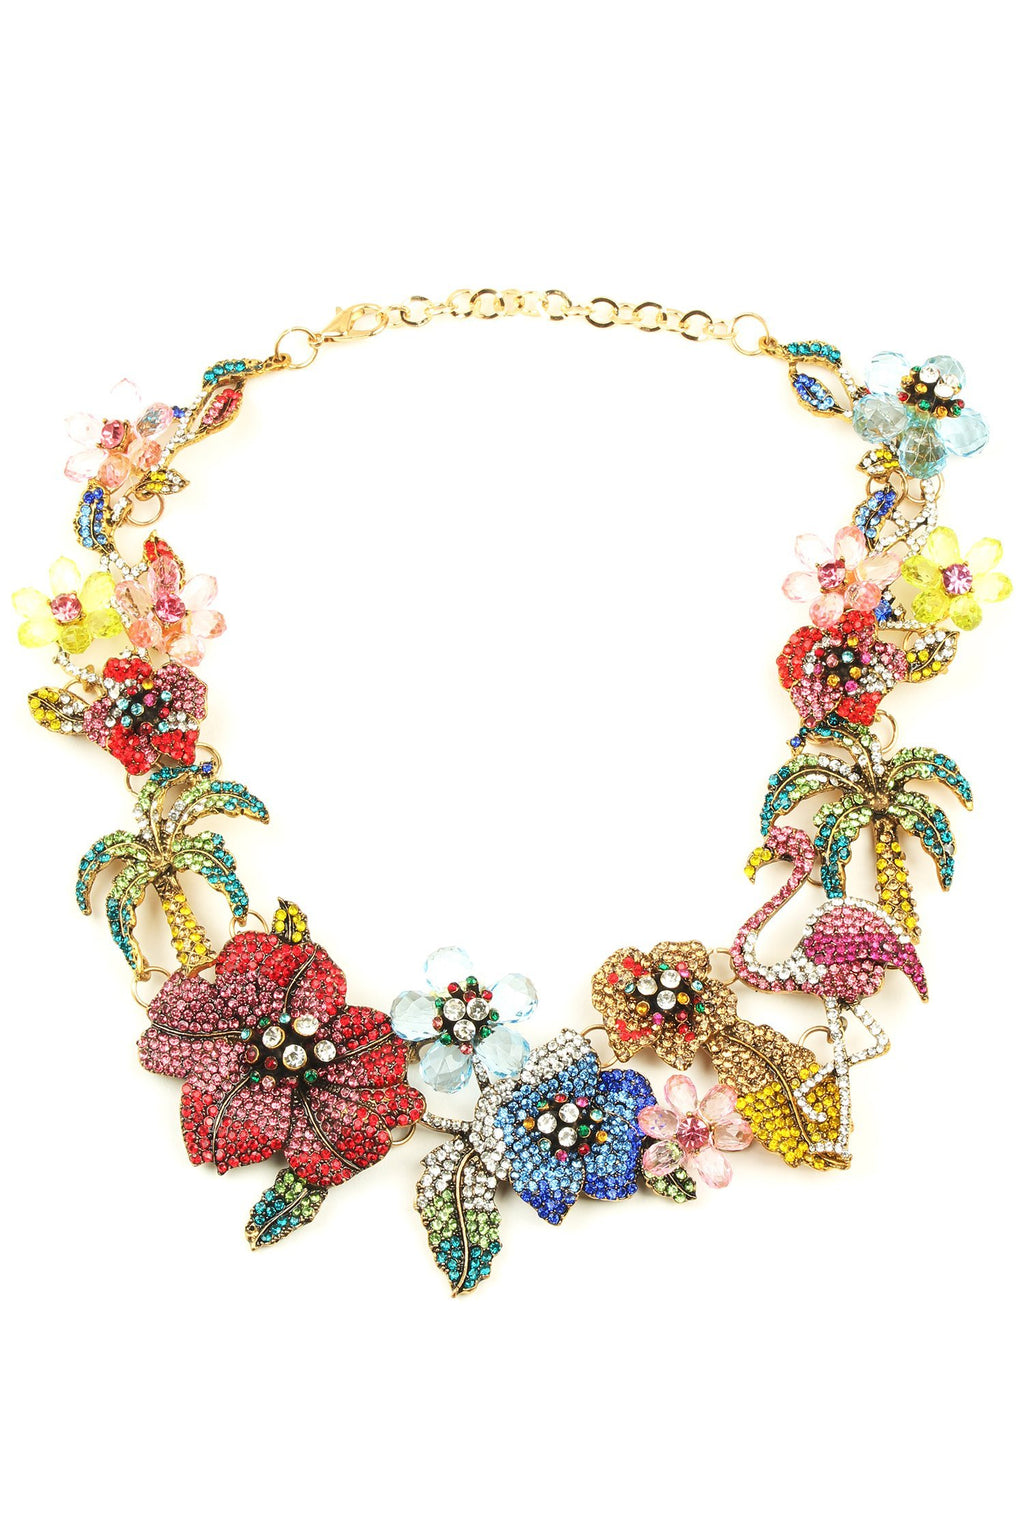 Collar necklace with gold chain and arrangement of red flowers, blue and yellow flowers. Flowers are studded with glass crystals. 